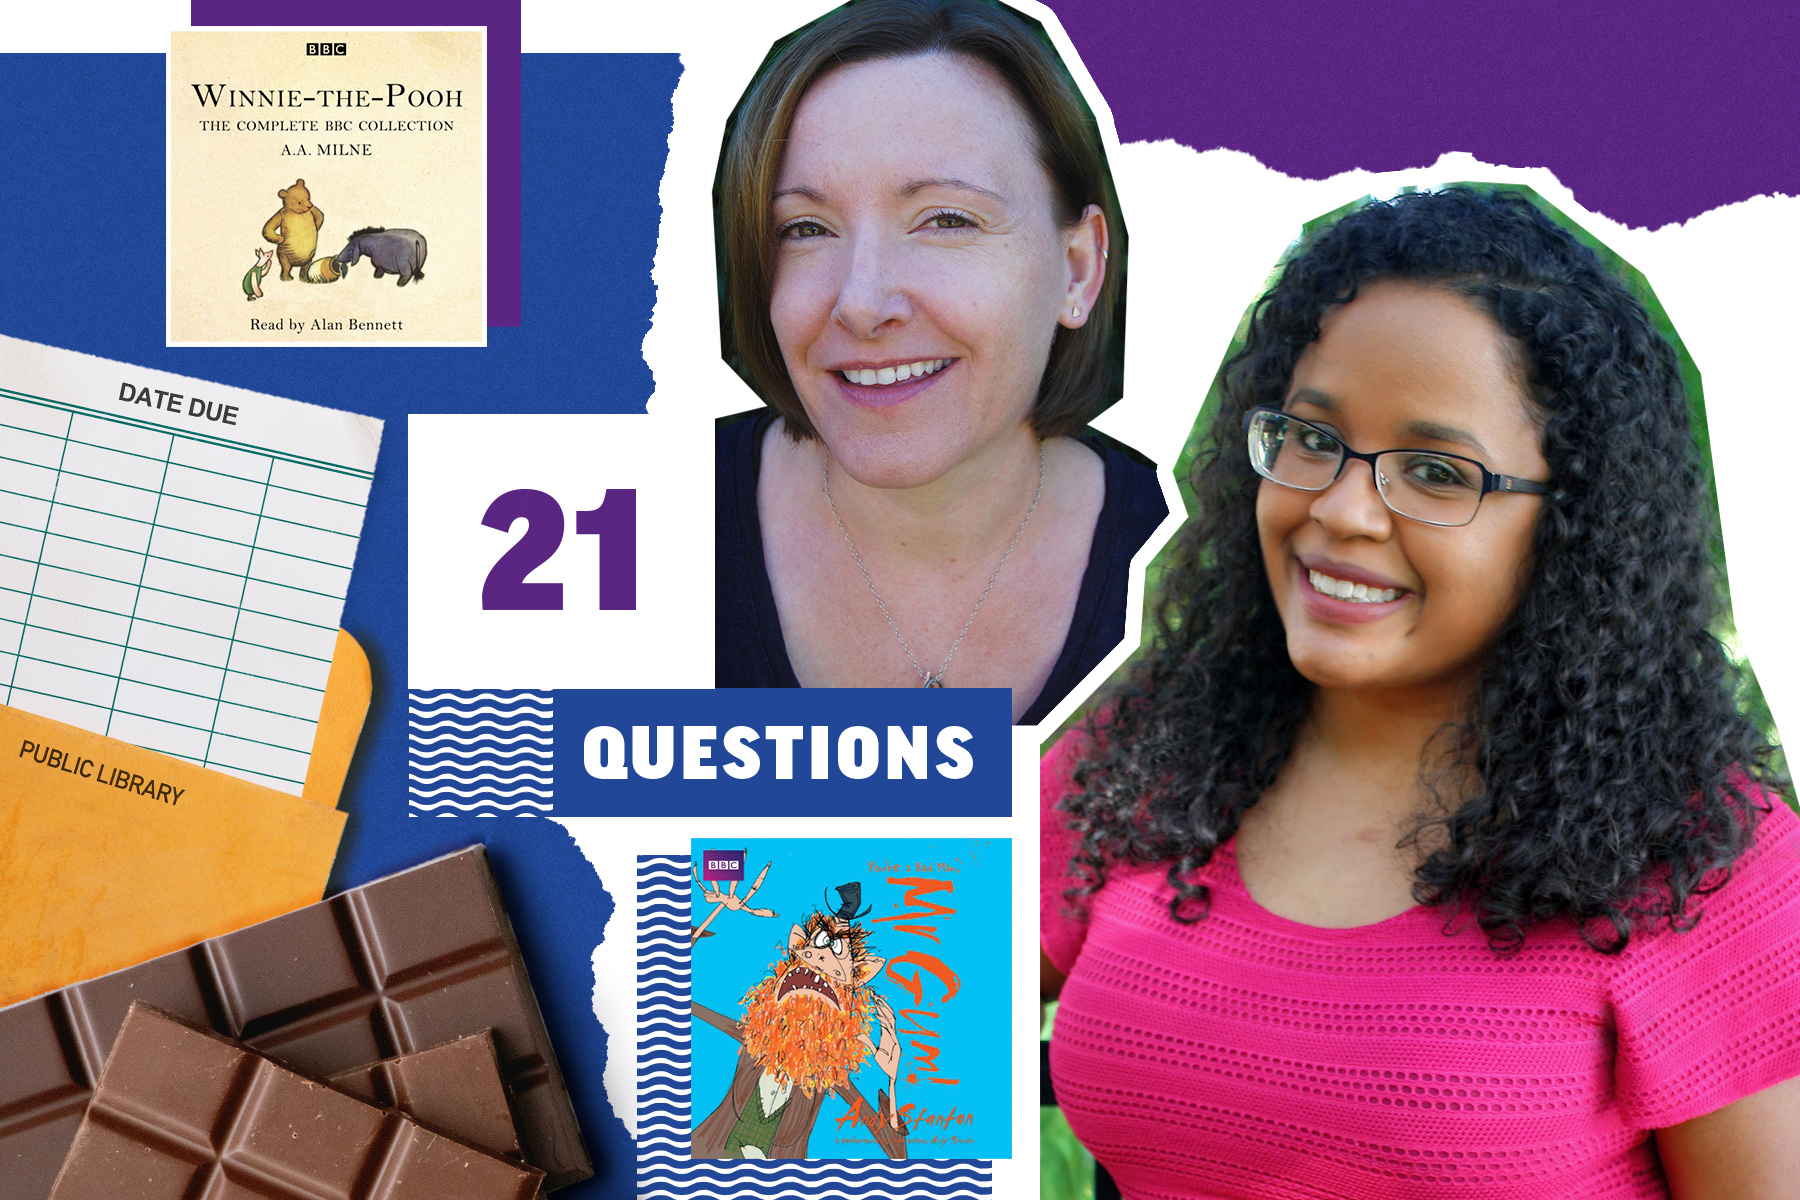 An image of author Lucy Brandt and illustrator Gladys Jose on a blue and purple collage background next to some chocolate, a Mr Gum book, Winnie the Pooh audiobook and a library card